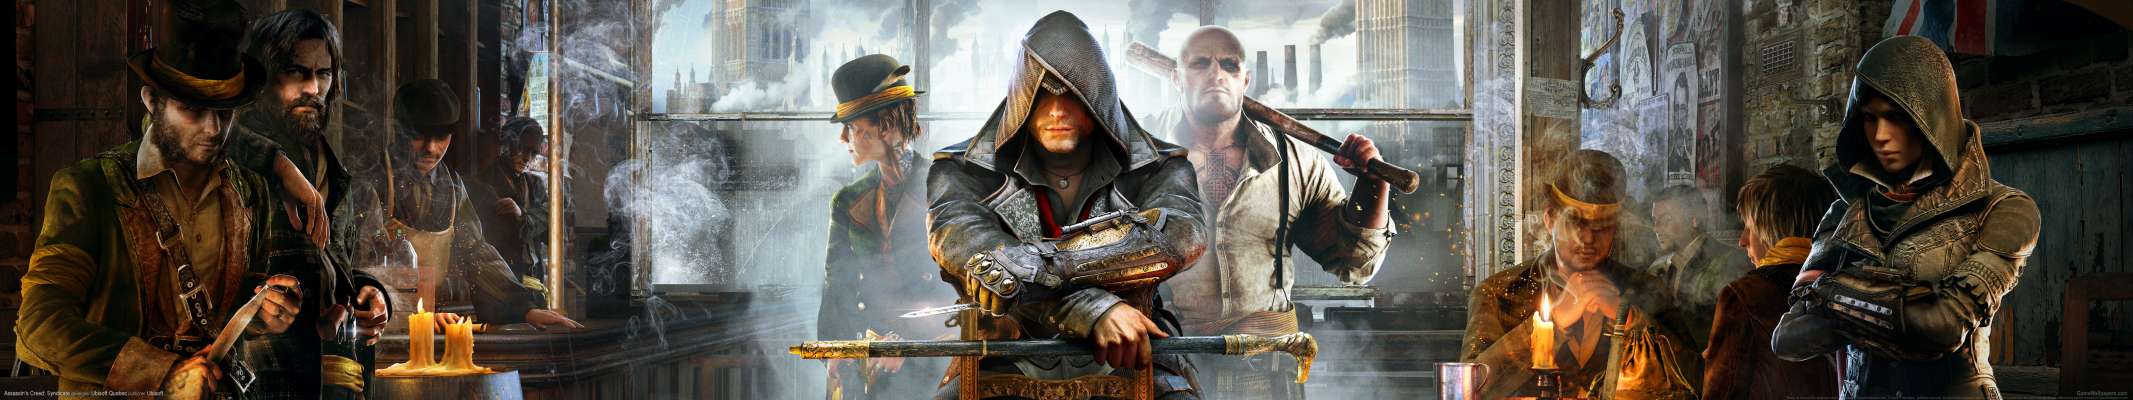 Assassin's Creed: Syndicate triple screen achtergrond